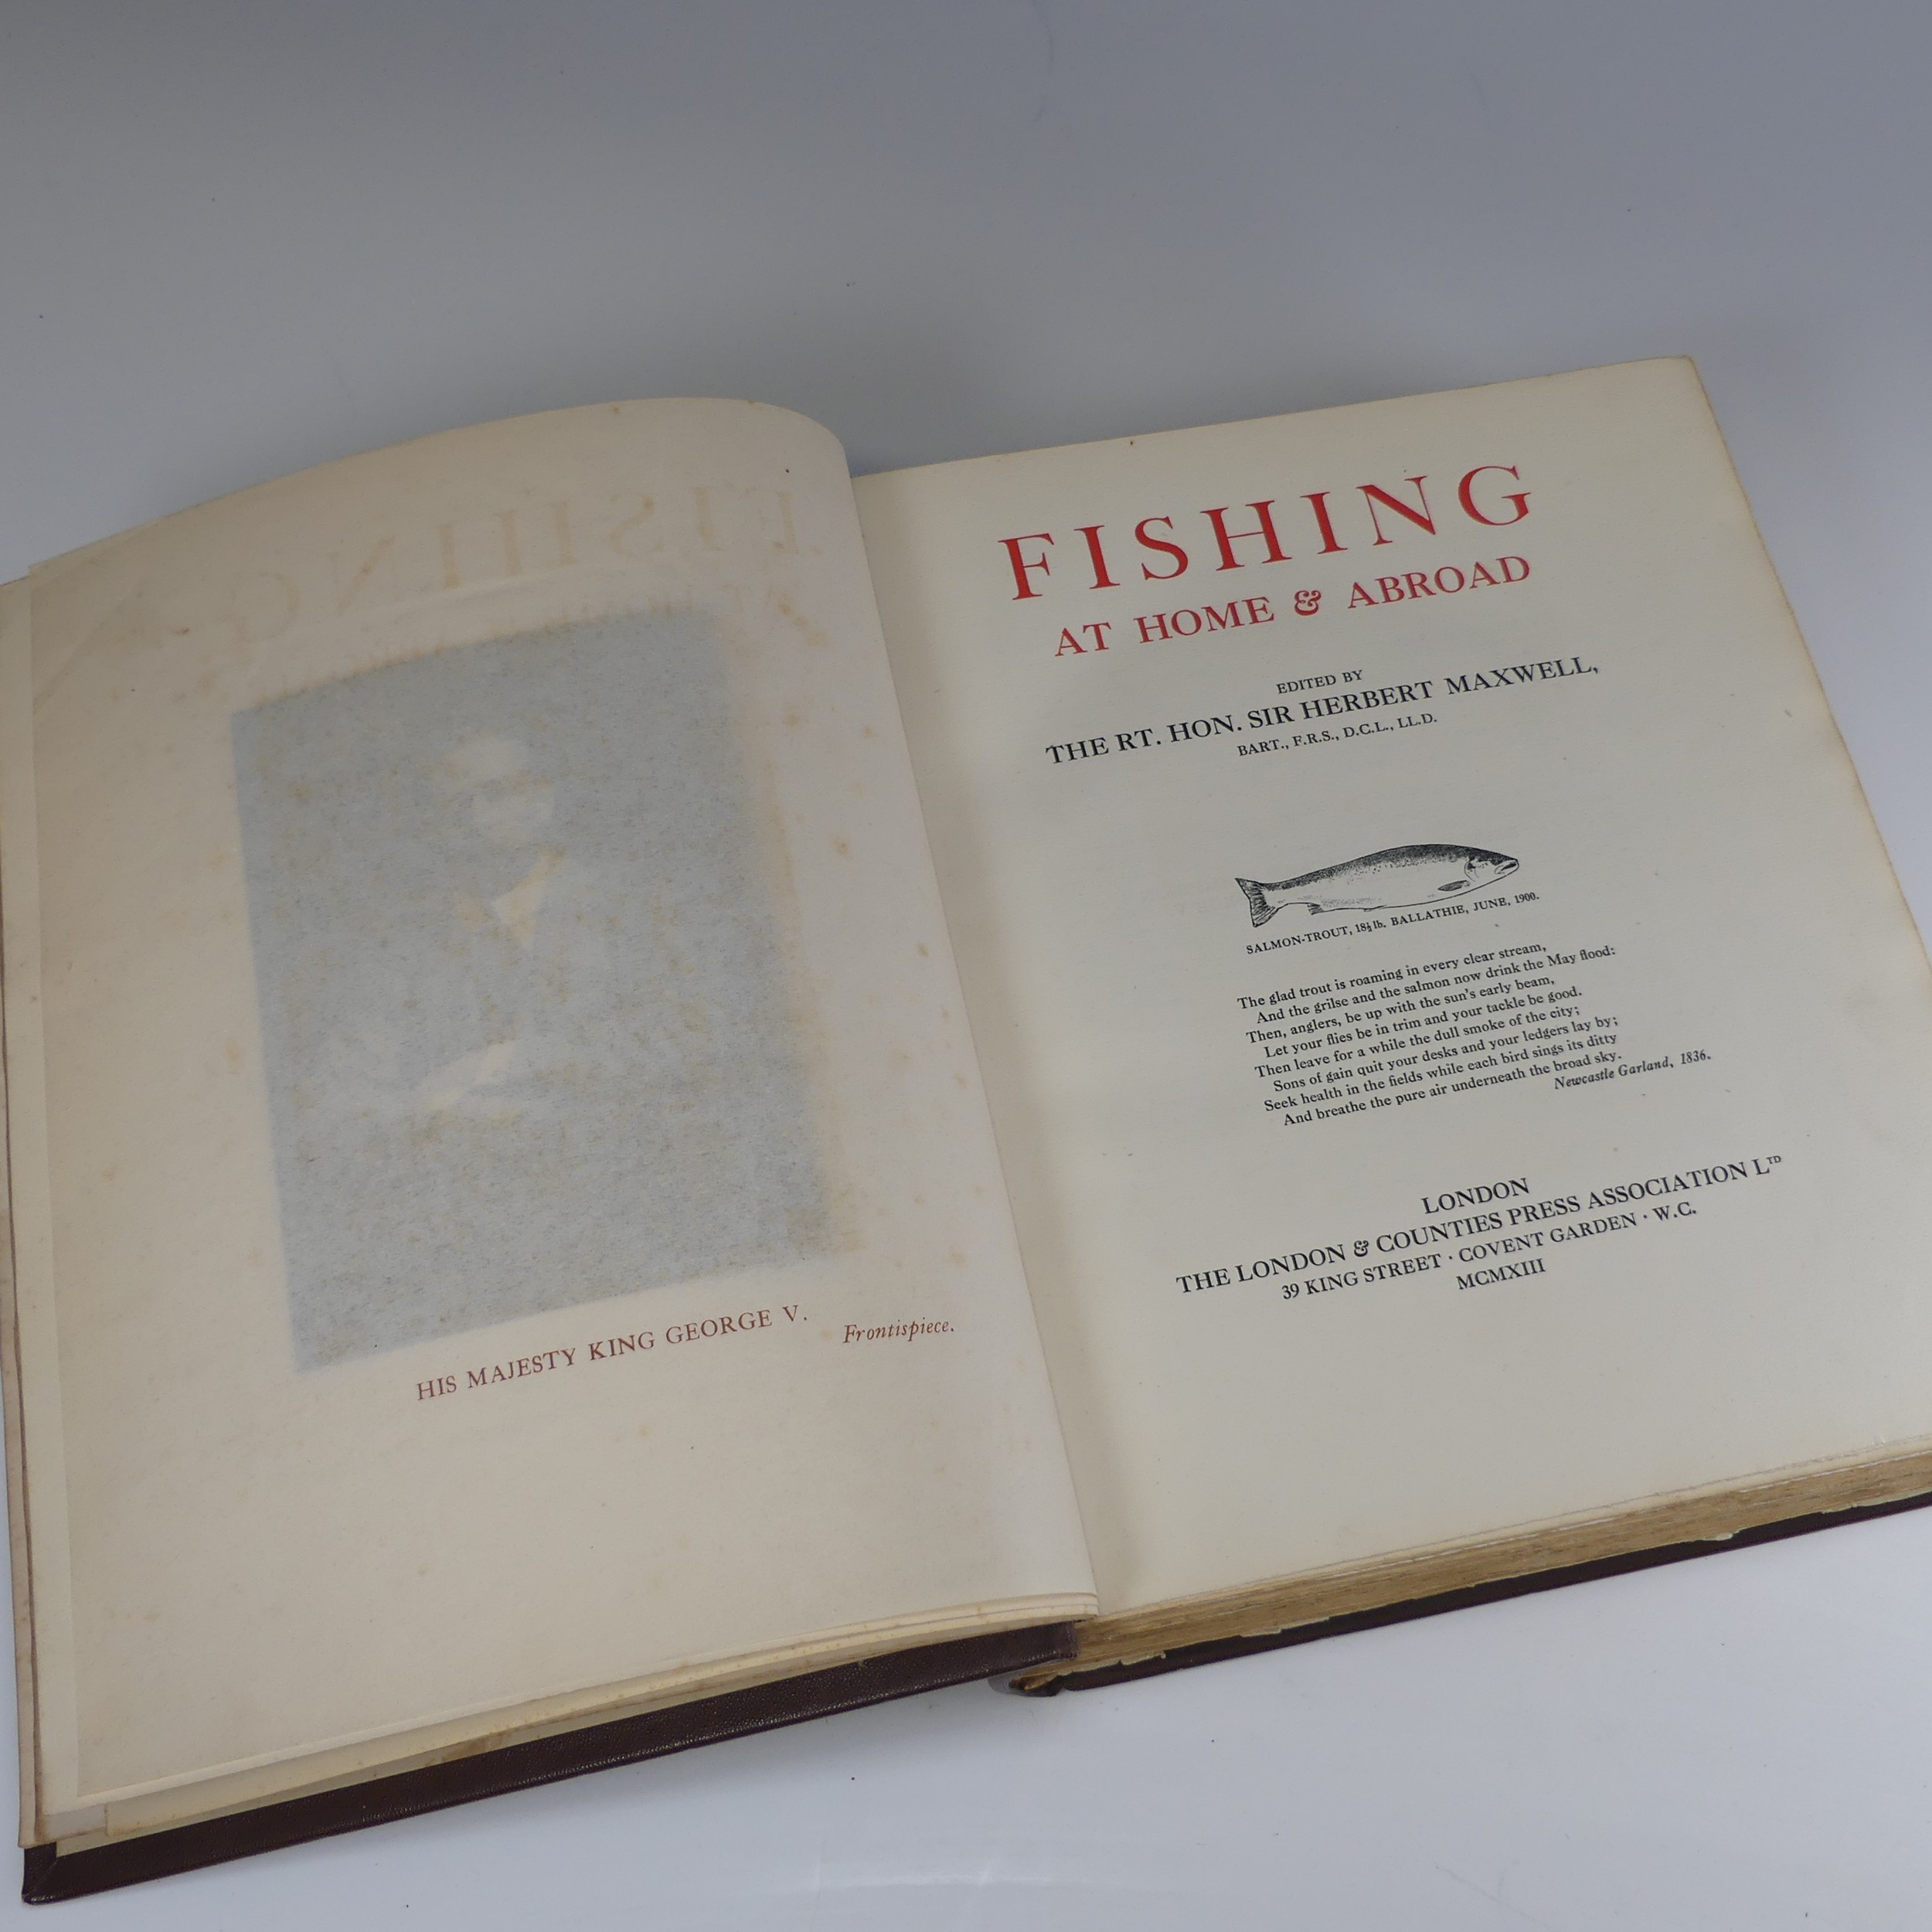 Maxwell (The Rt. Hon. Sir Herbert); 'Fishing At Home & Abroad', limited edition published by The - Bild 4 aus 7